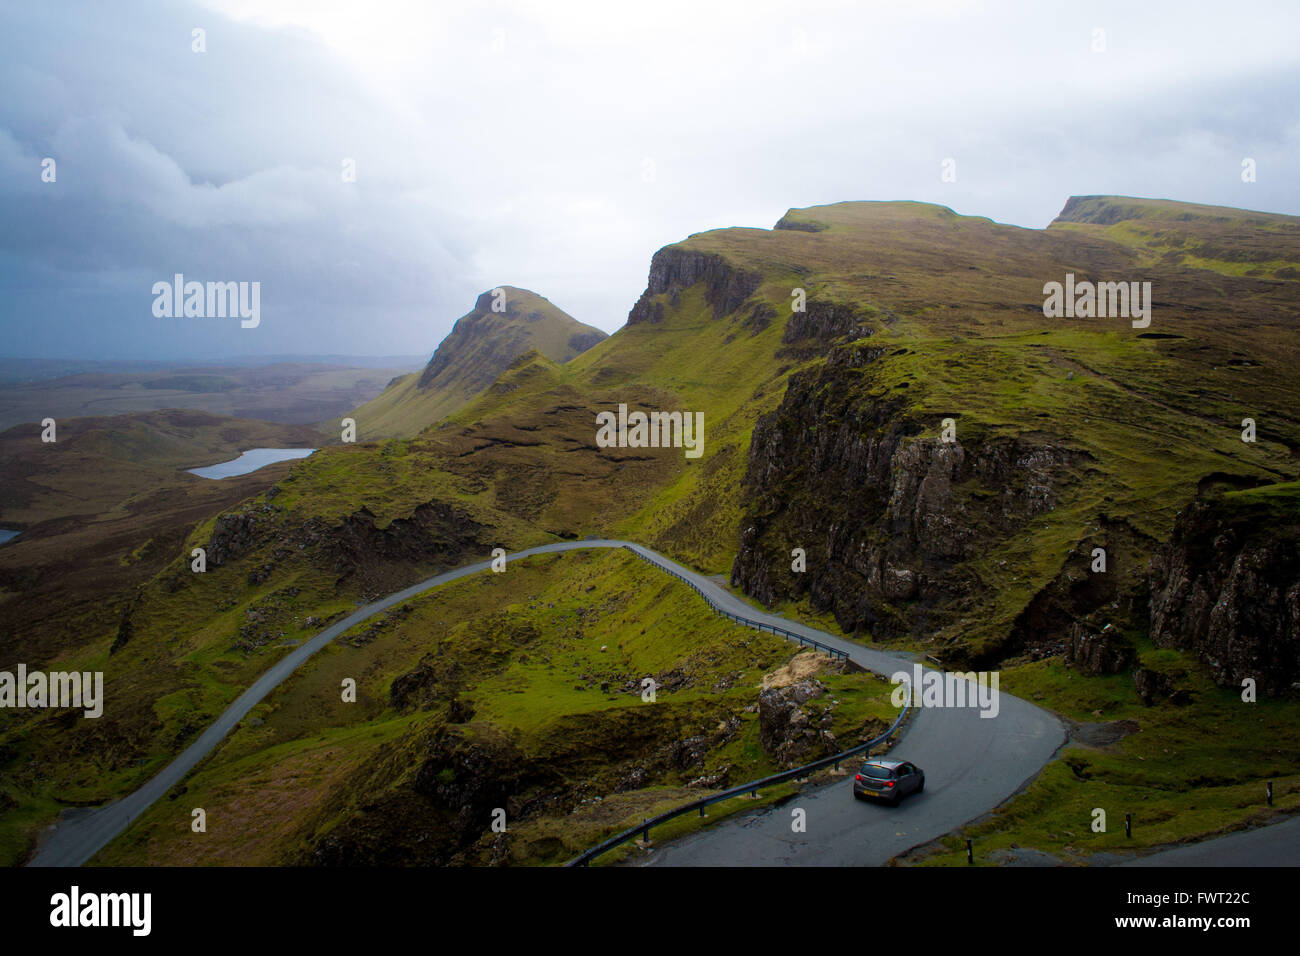 A car on the winding road leading through the mountainous Quiraing on the Isle of Skye, Scotland Stock Photo